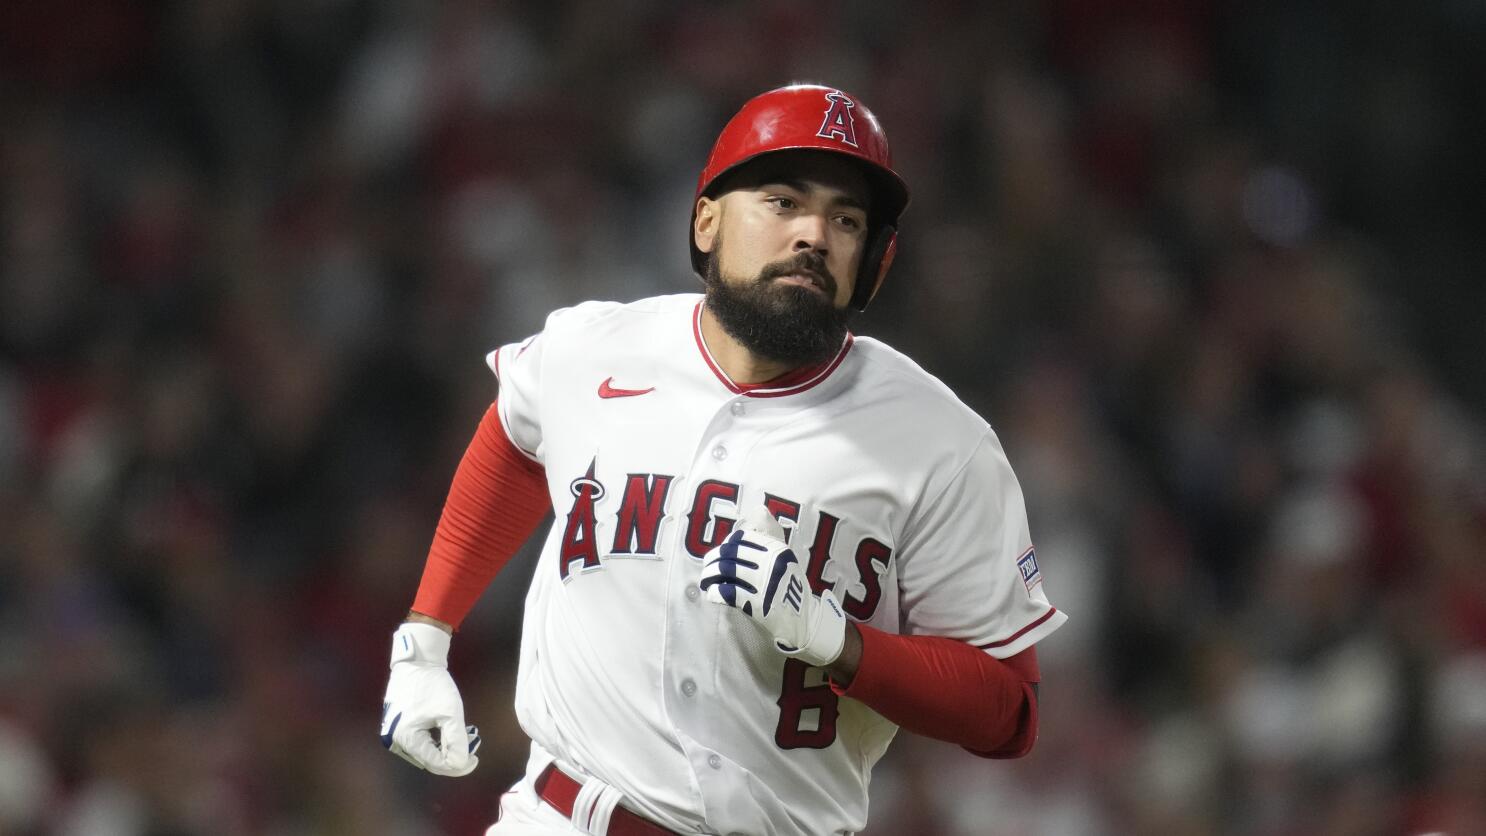 Angels winning despite aches and pains; Rendon among injured infielders -  The San Diego Union-Tribune